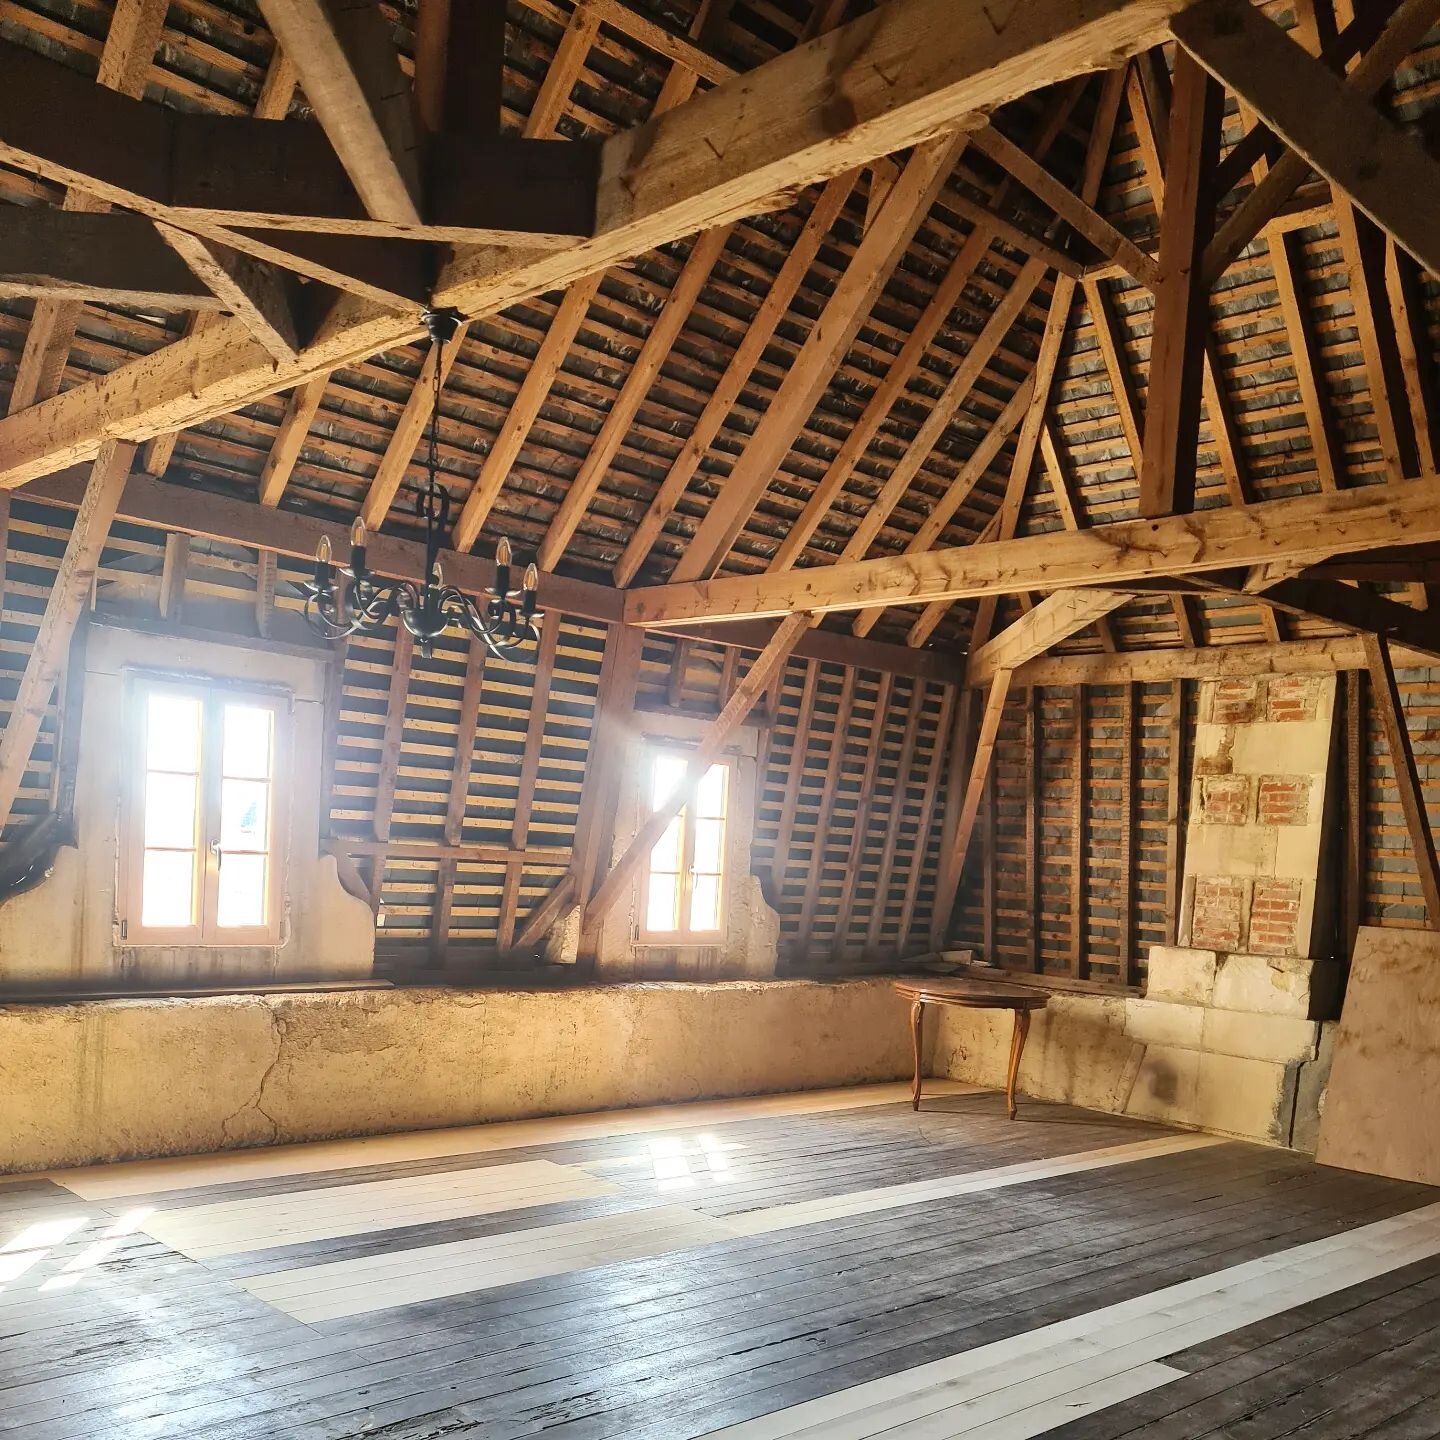 Welcome to the attic of the lodge. With the warm weather outside, it&rsquo;s the perfect temperature in here just under the roof. This can be a meditation room, yoga room, playroom. We are currently adding a game table and comfy chair for card games,